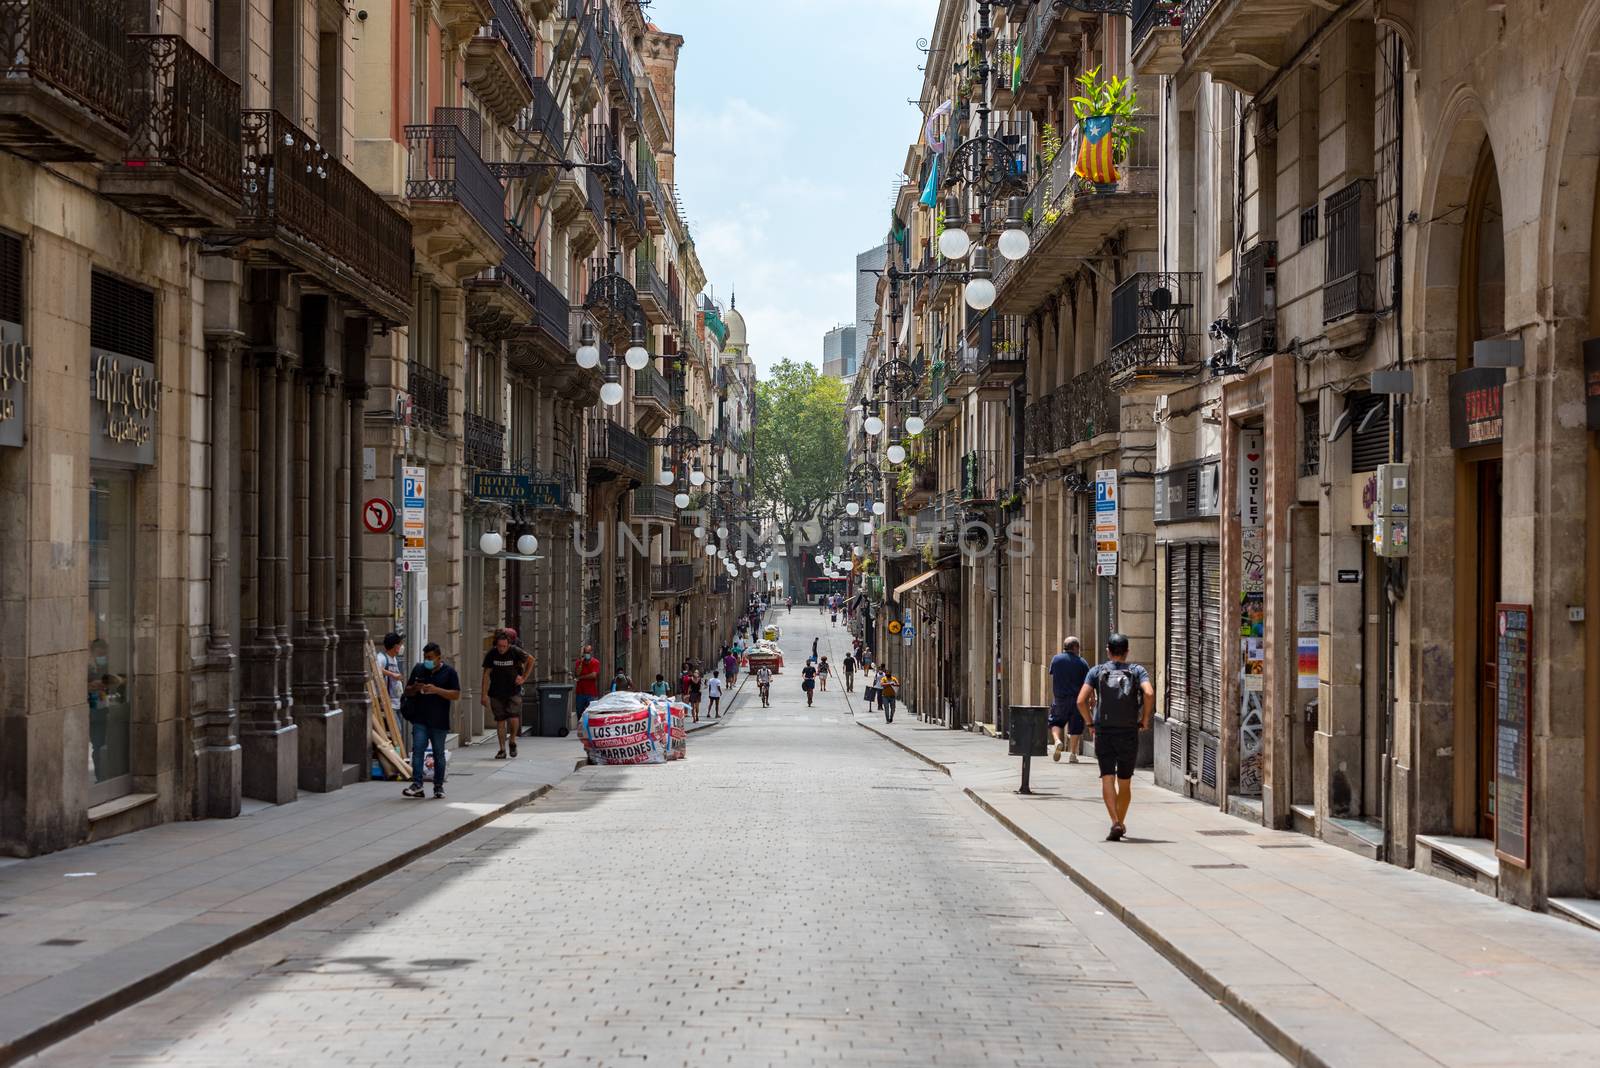 People walking through empty streets after COVID 19 in Barcelona by martinscphoto